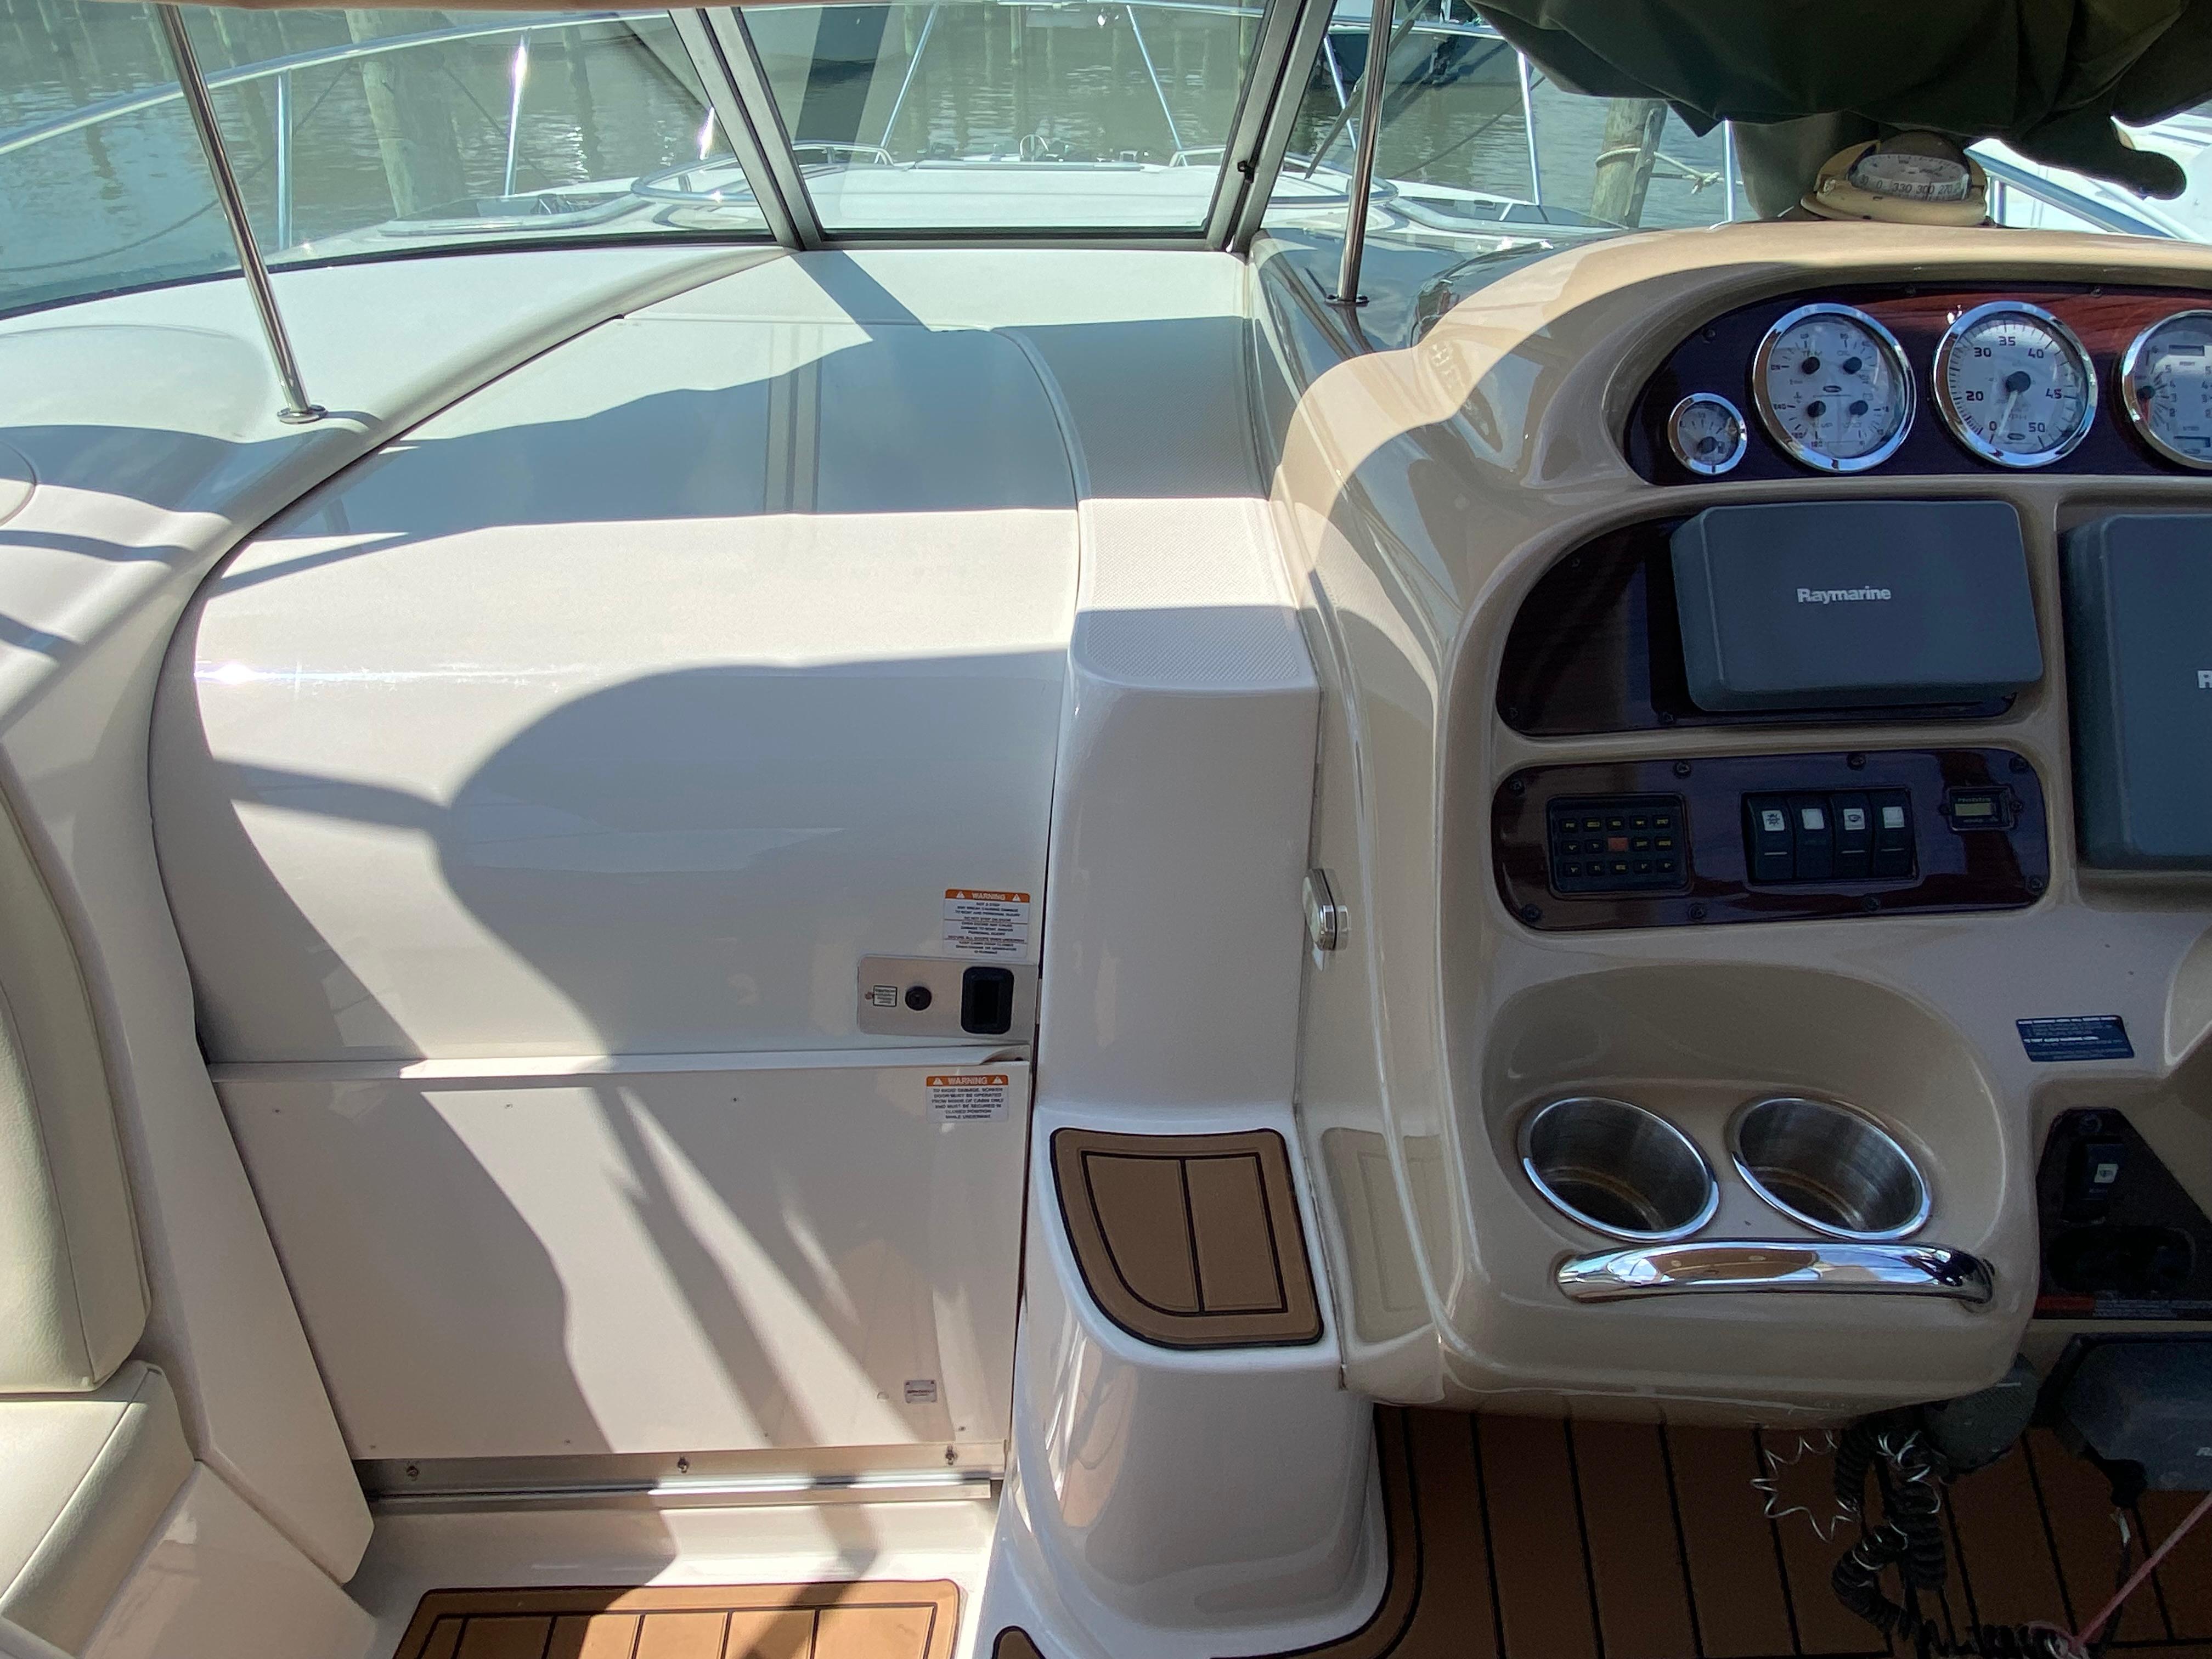 SEA SHED Yacht Brokers of Annapolis